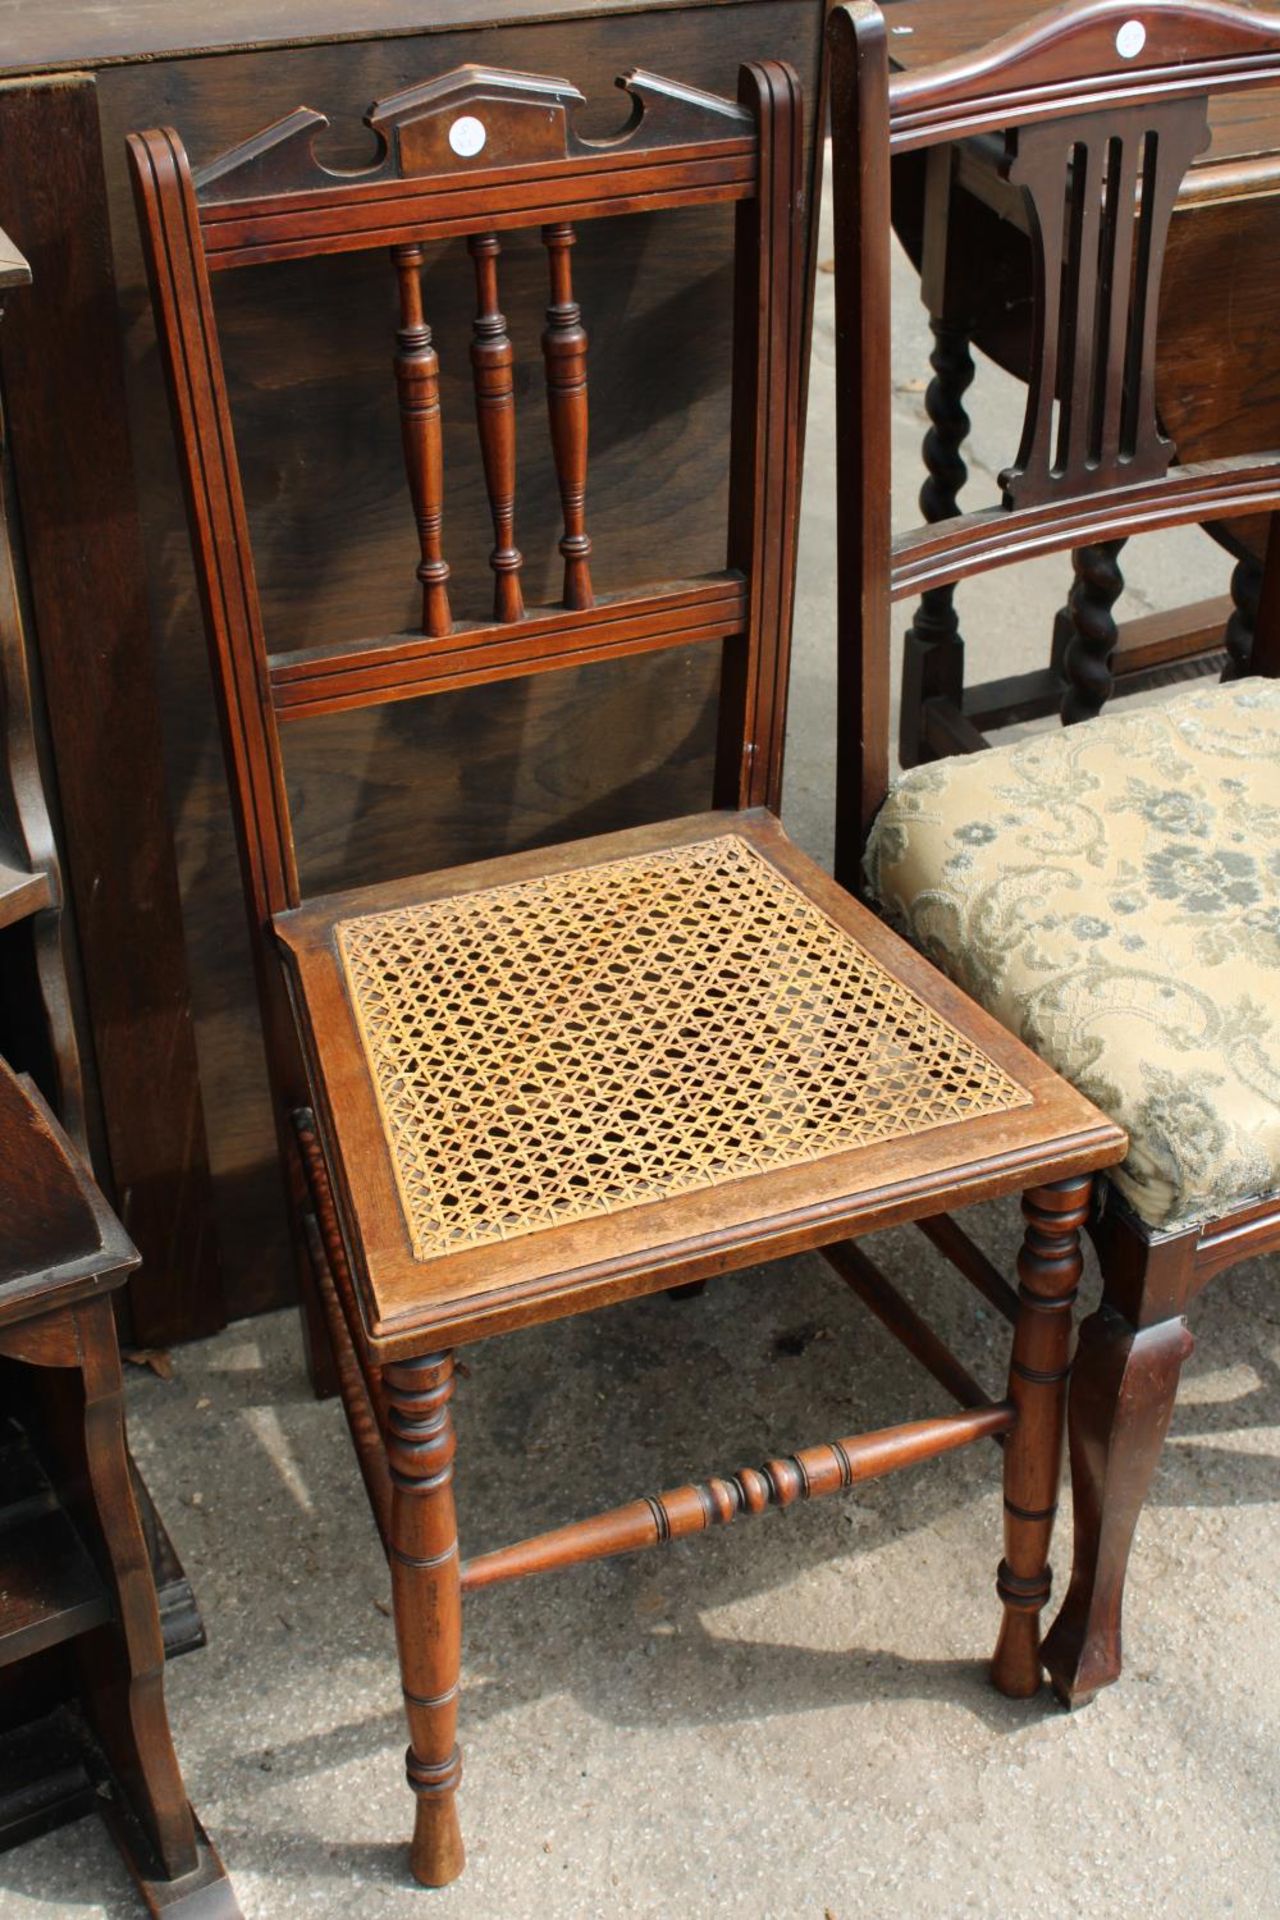 THREE VARIOUS EDWARDIAN BEDROOM CHAIRS - Image 2 of 3